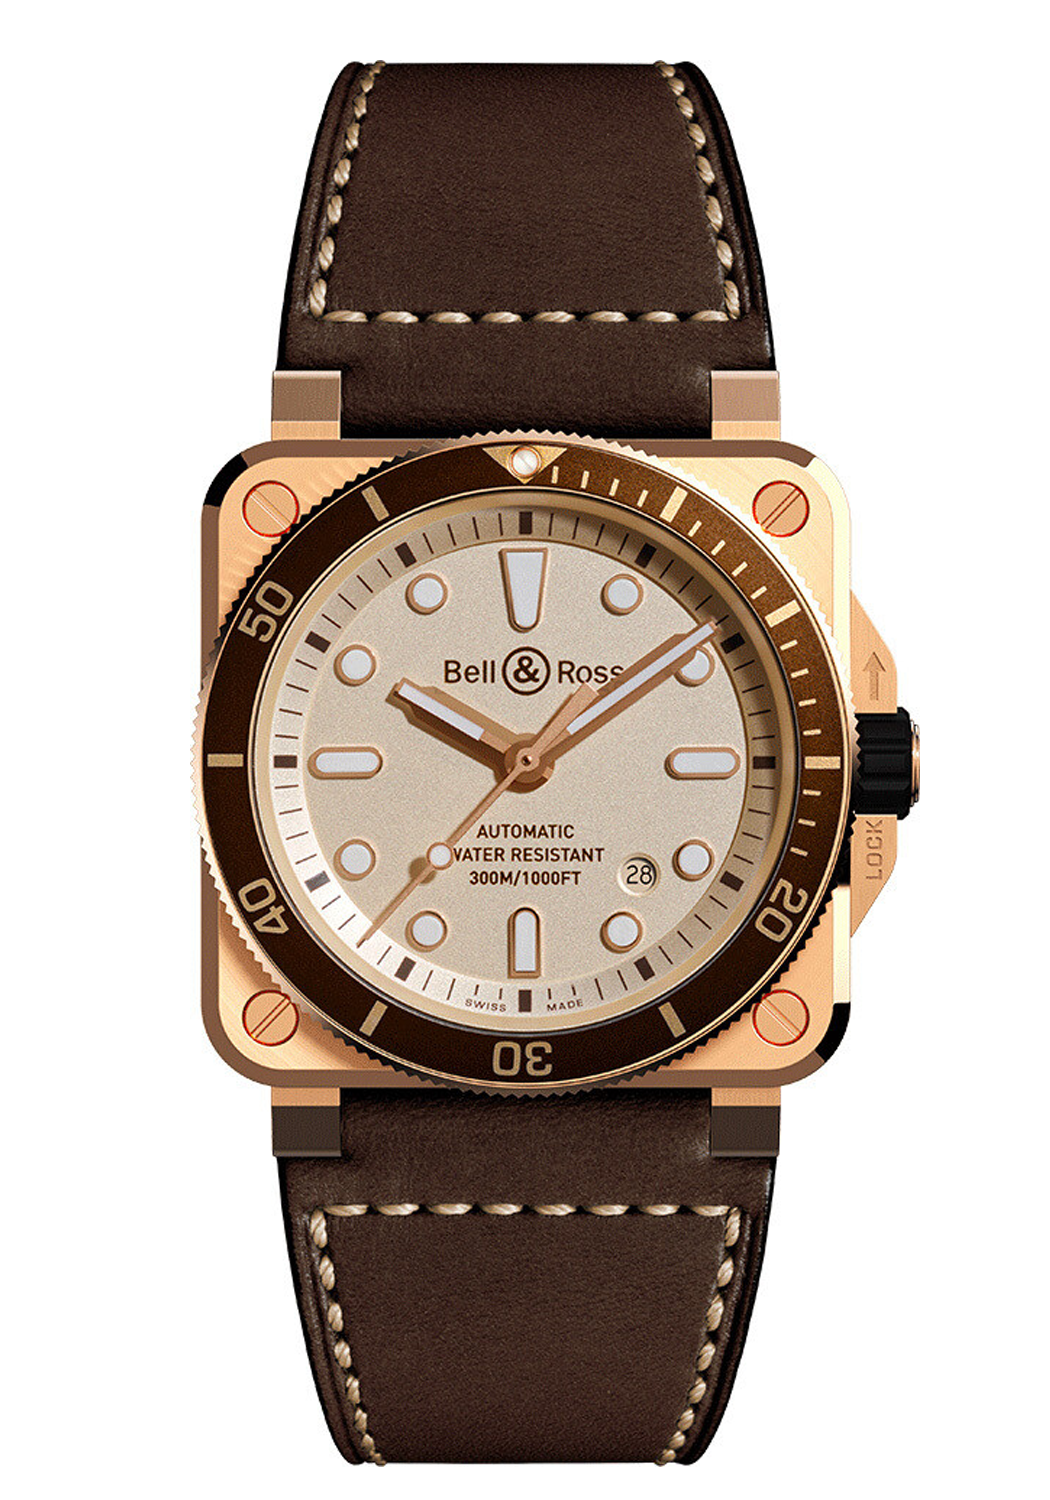 Bell & Ross BR 03-92 Diver White Bronze | OsterJewelers.com